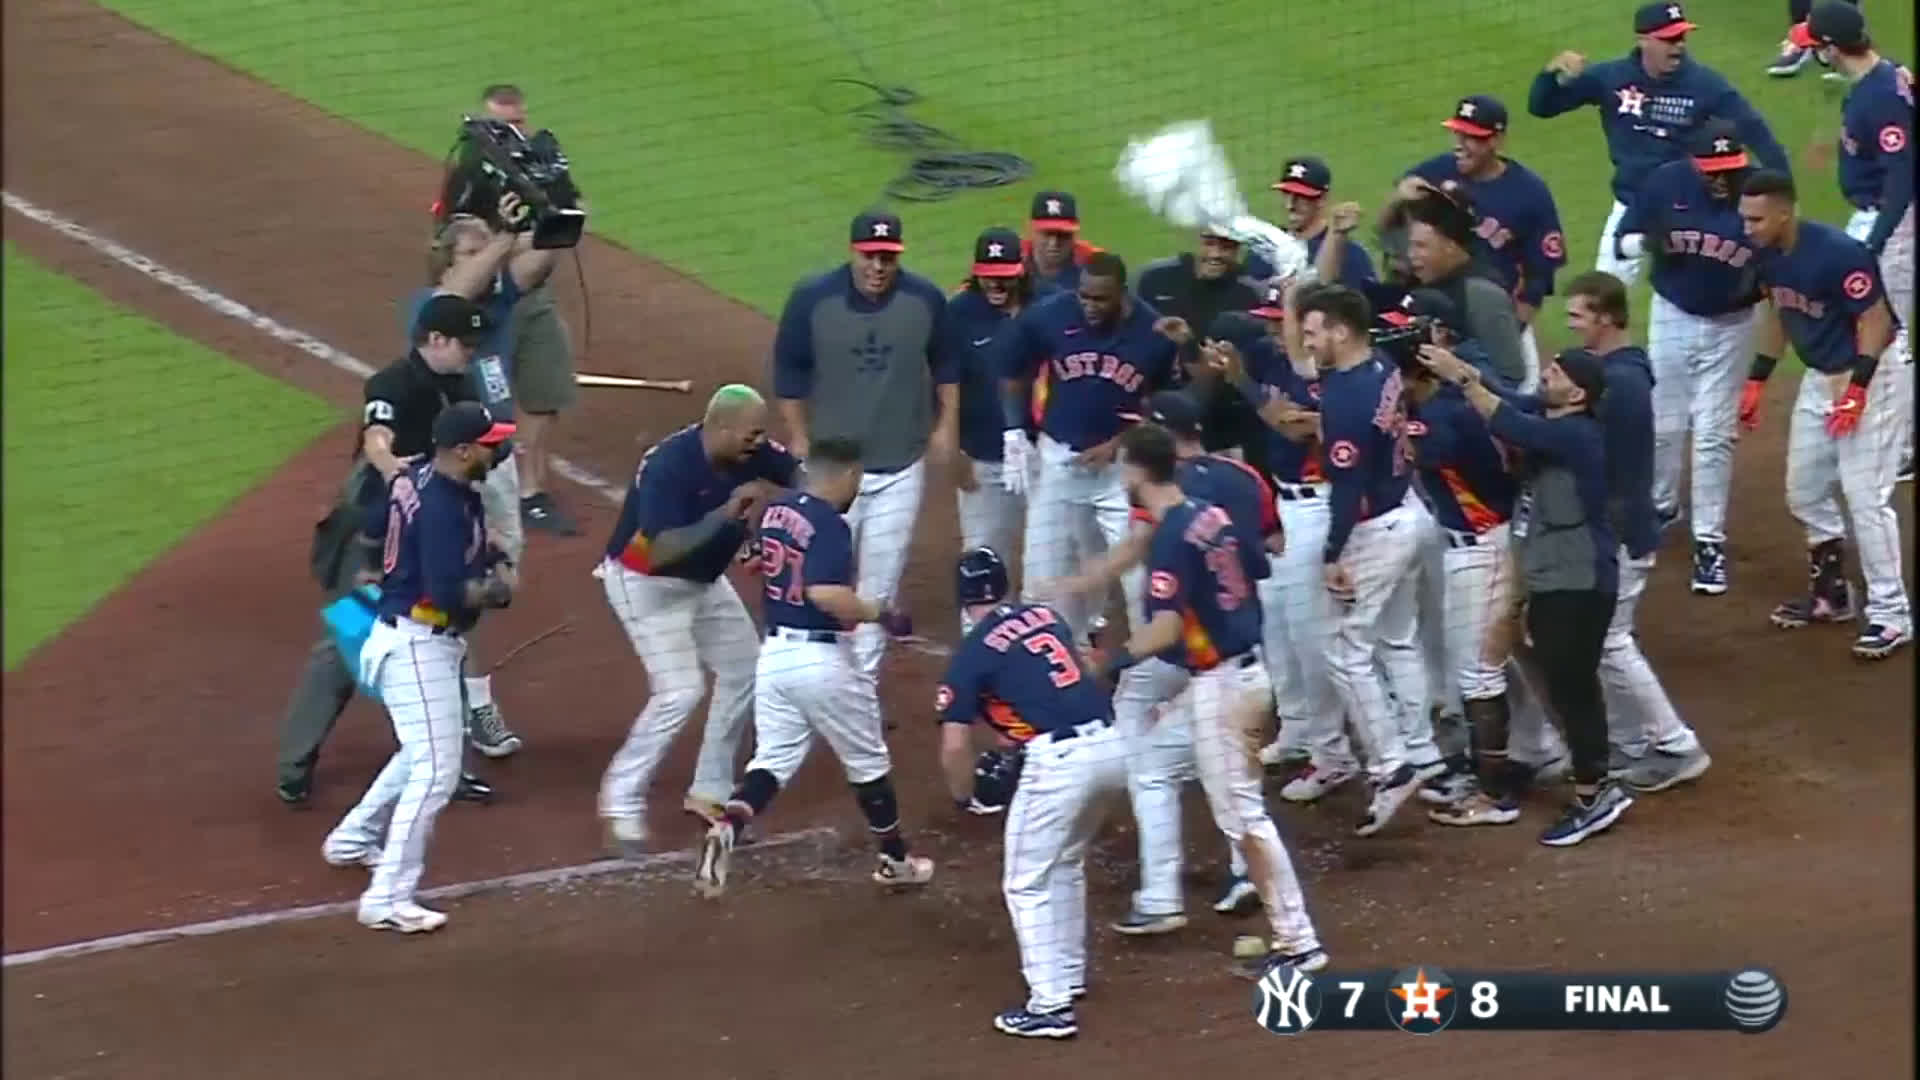 Jose Altuve and the Astros walk-off the Yankees.